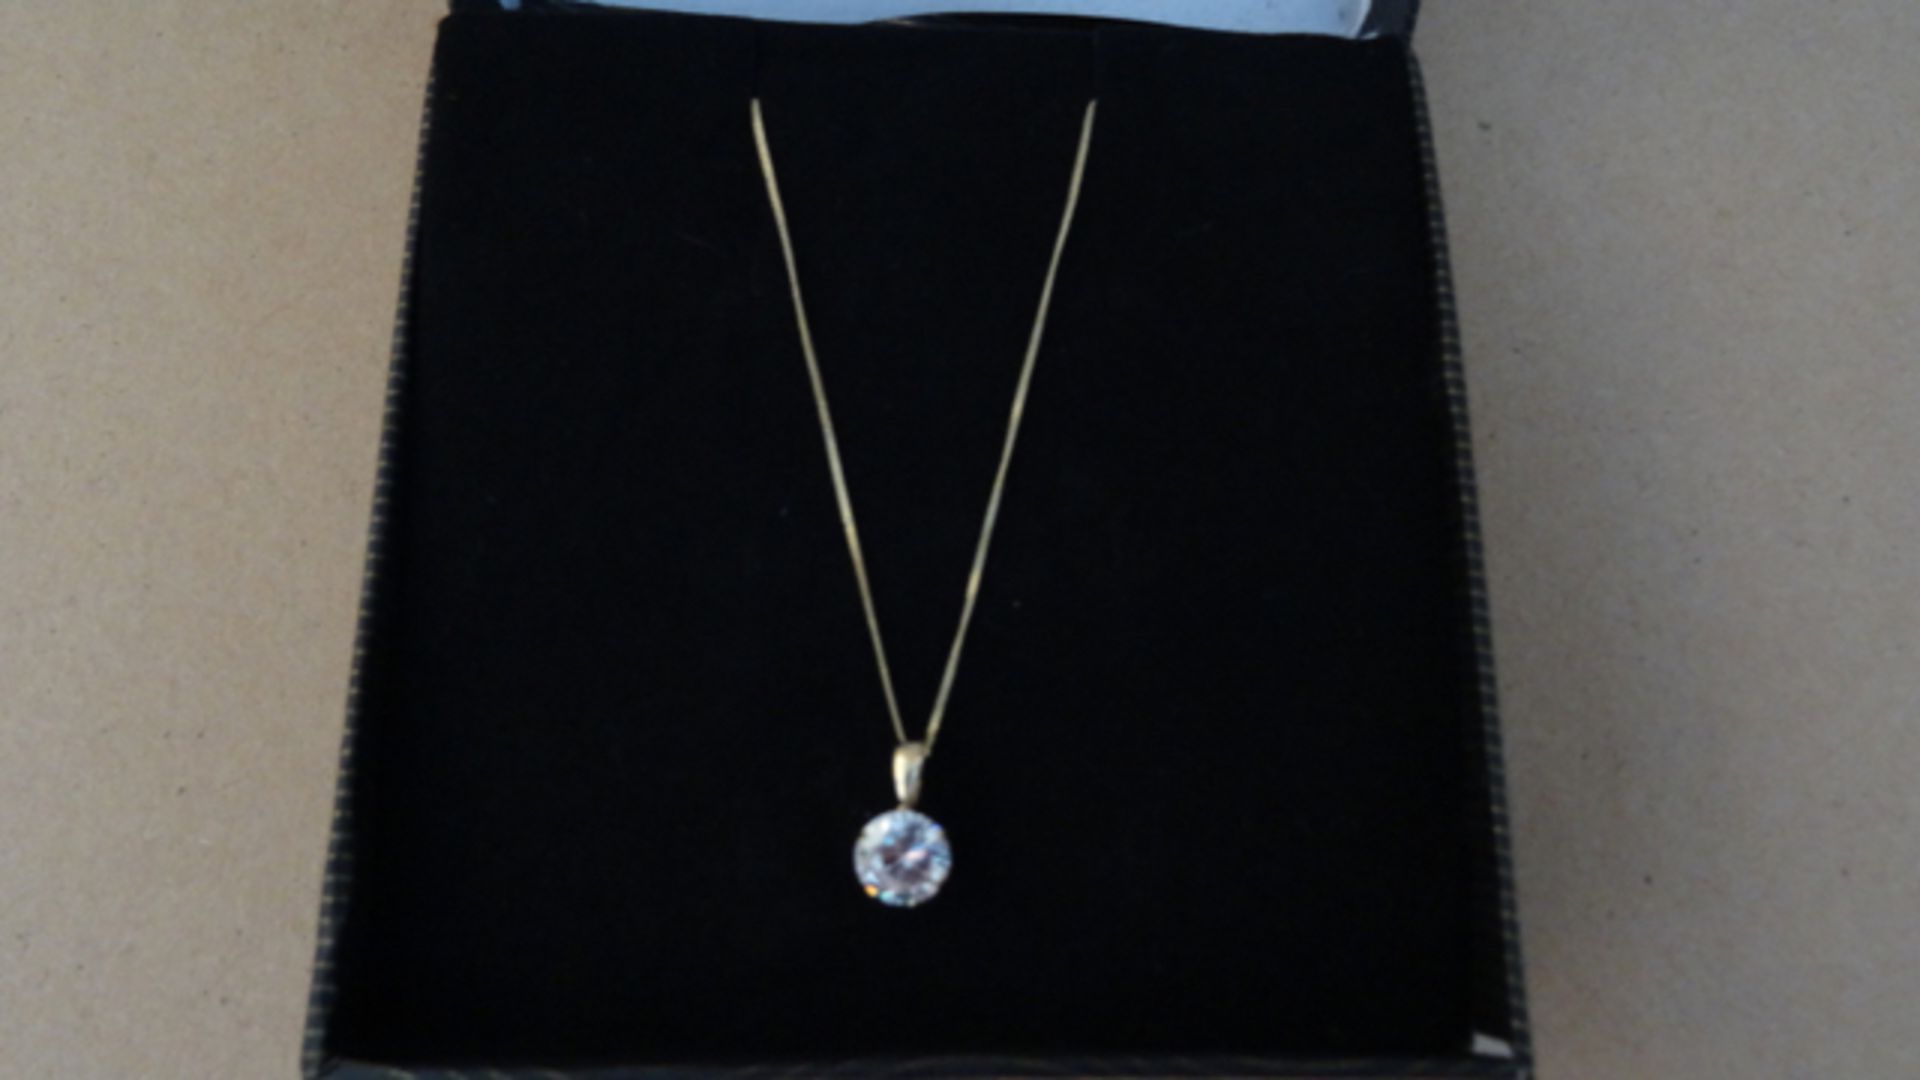 1 x 9 Carat Yellow Gold Chain with Cubic Zirconia Pendant. Retail value £79.